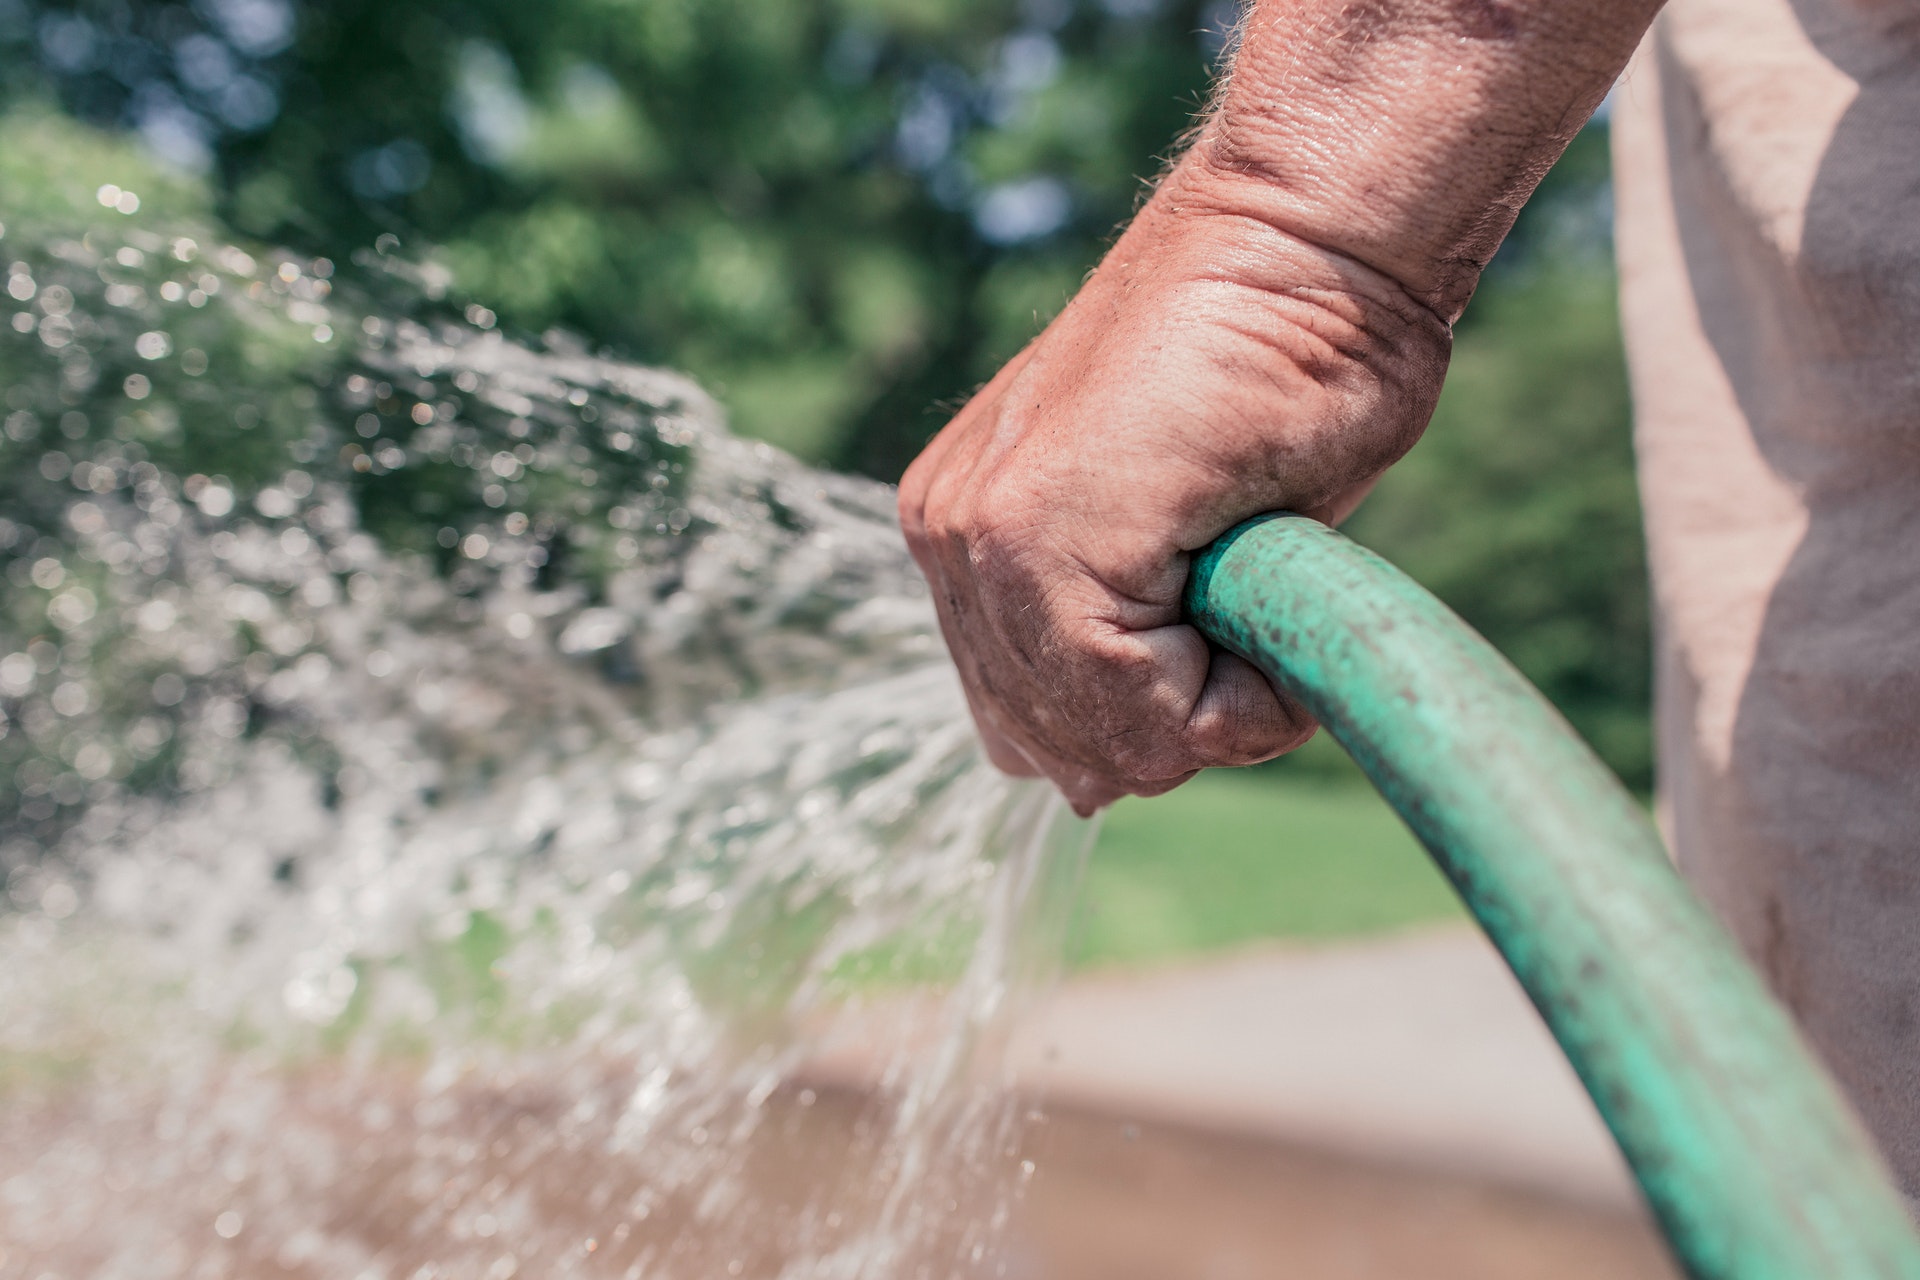 Why hosepipe bans should be a wake-up call to water companies